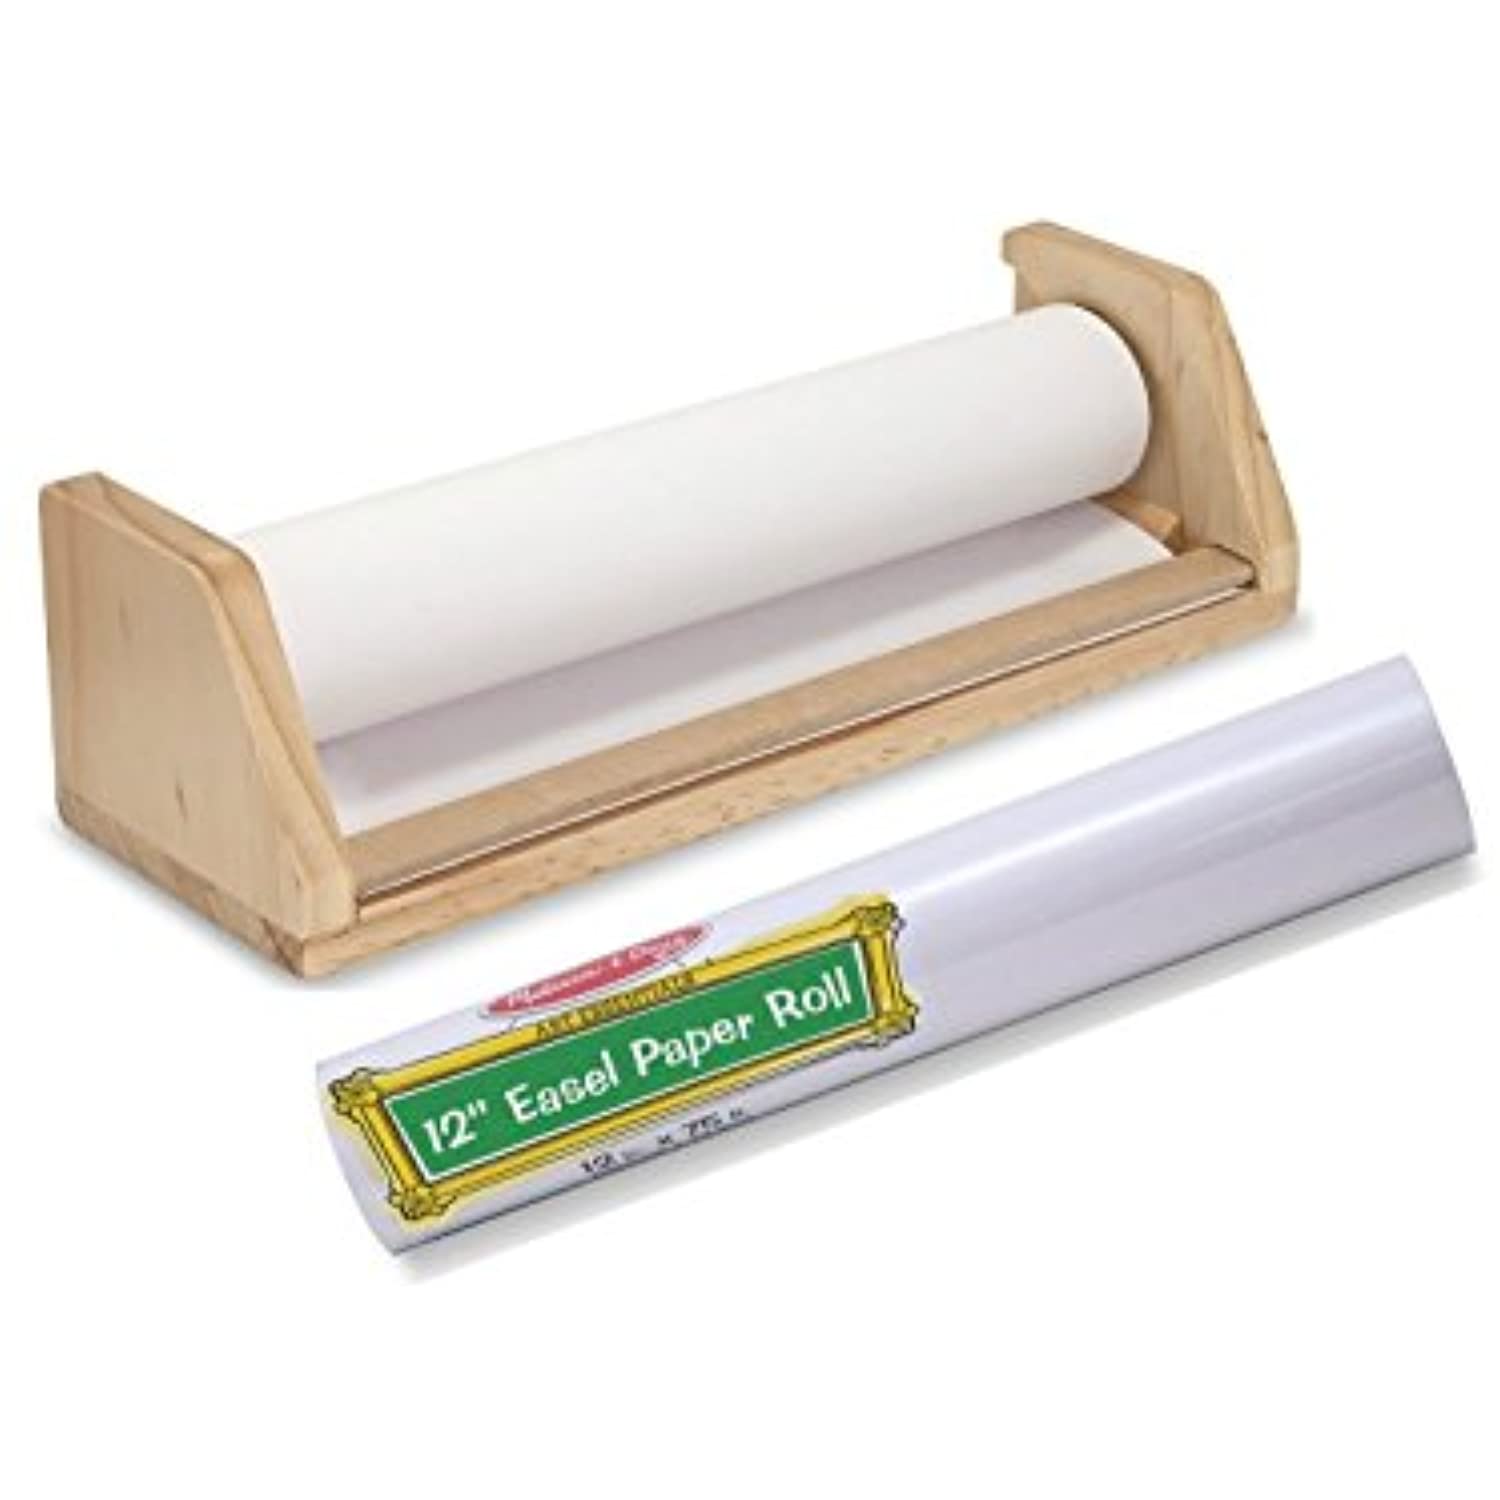 Melissa and Doug Craft Paper Dispenser and Easel Roll Bundle